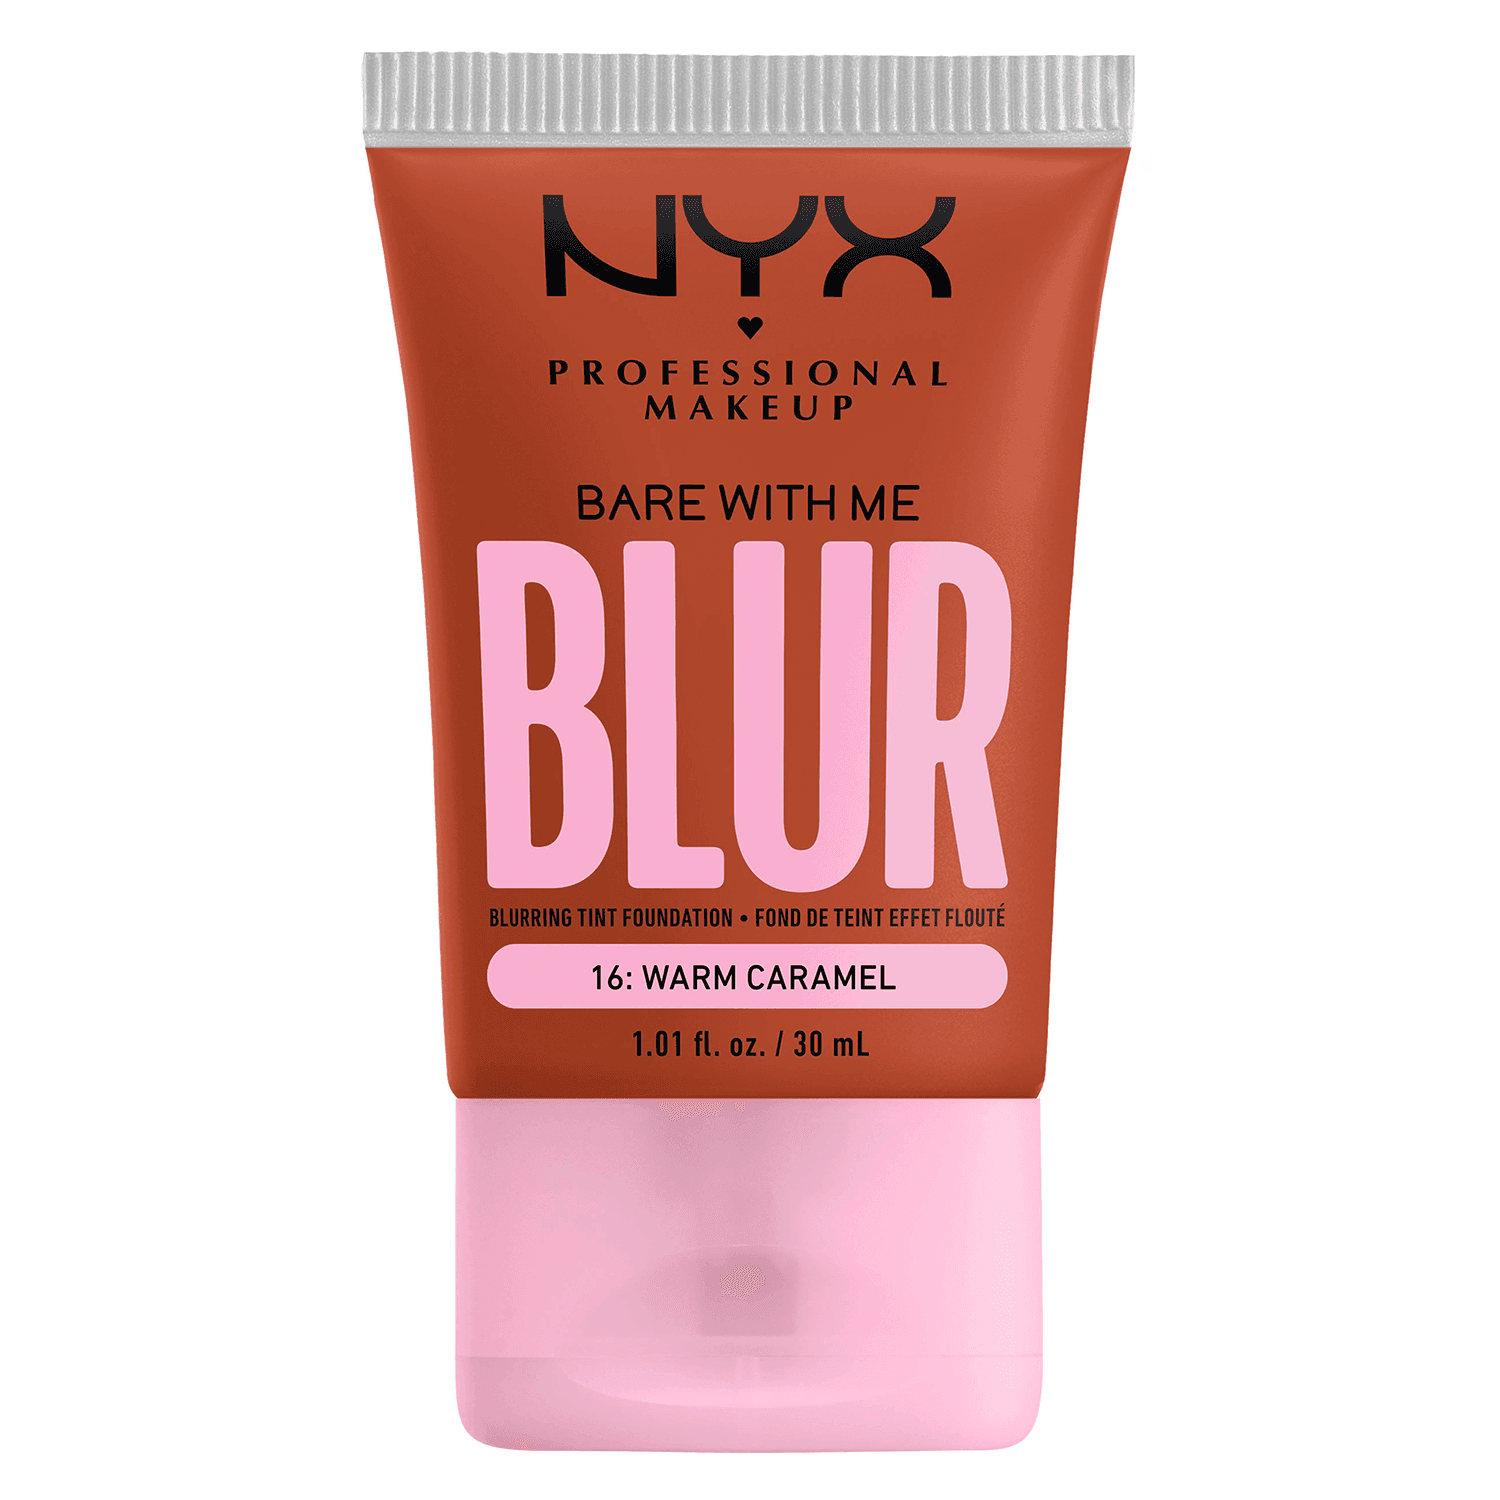 Bare with me - Blur Tint Foundation Warm Caramel 16